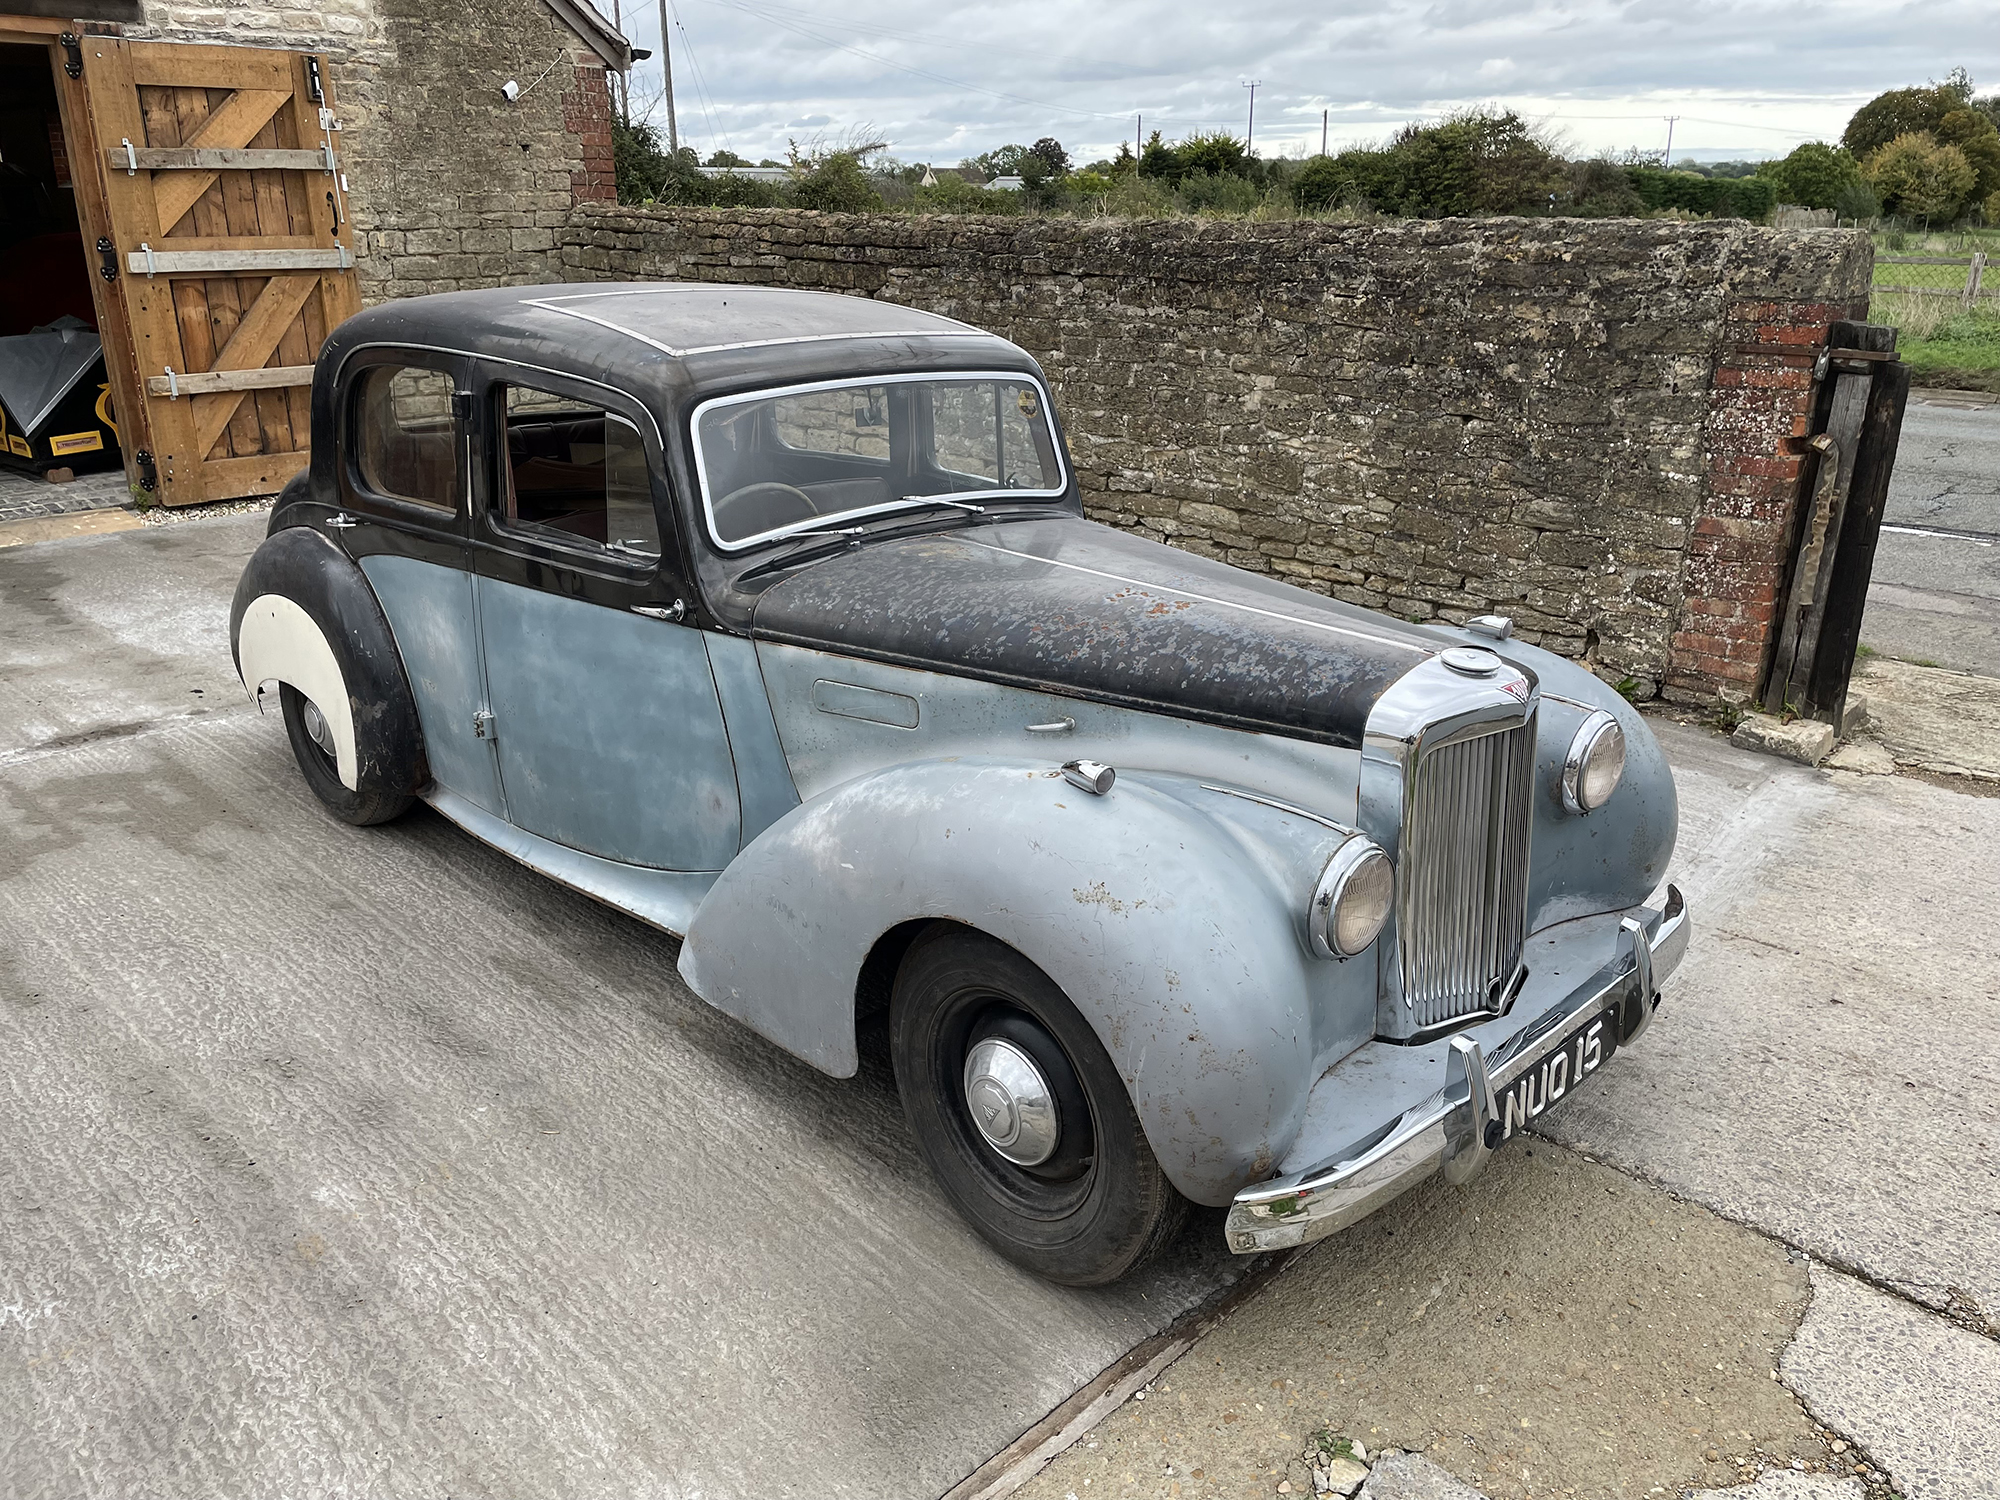 1950s Alvis TA21 Project Reg. no. NUO 15 Chassis no. 24596 Engine no. 24596